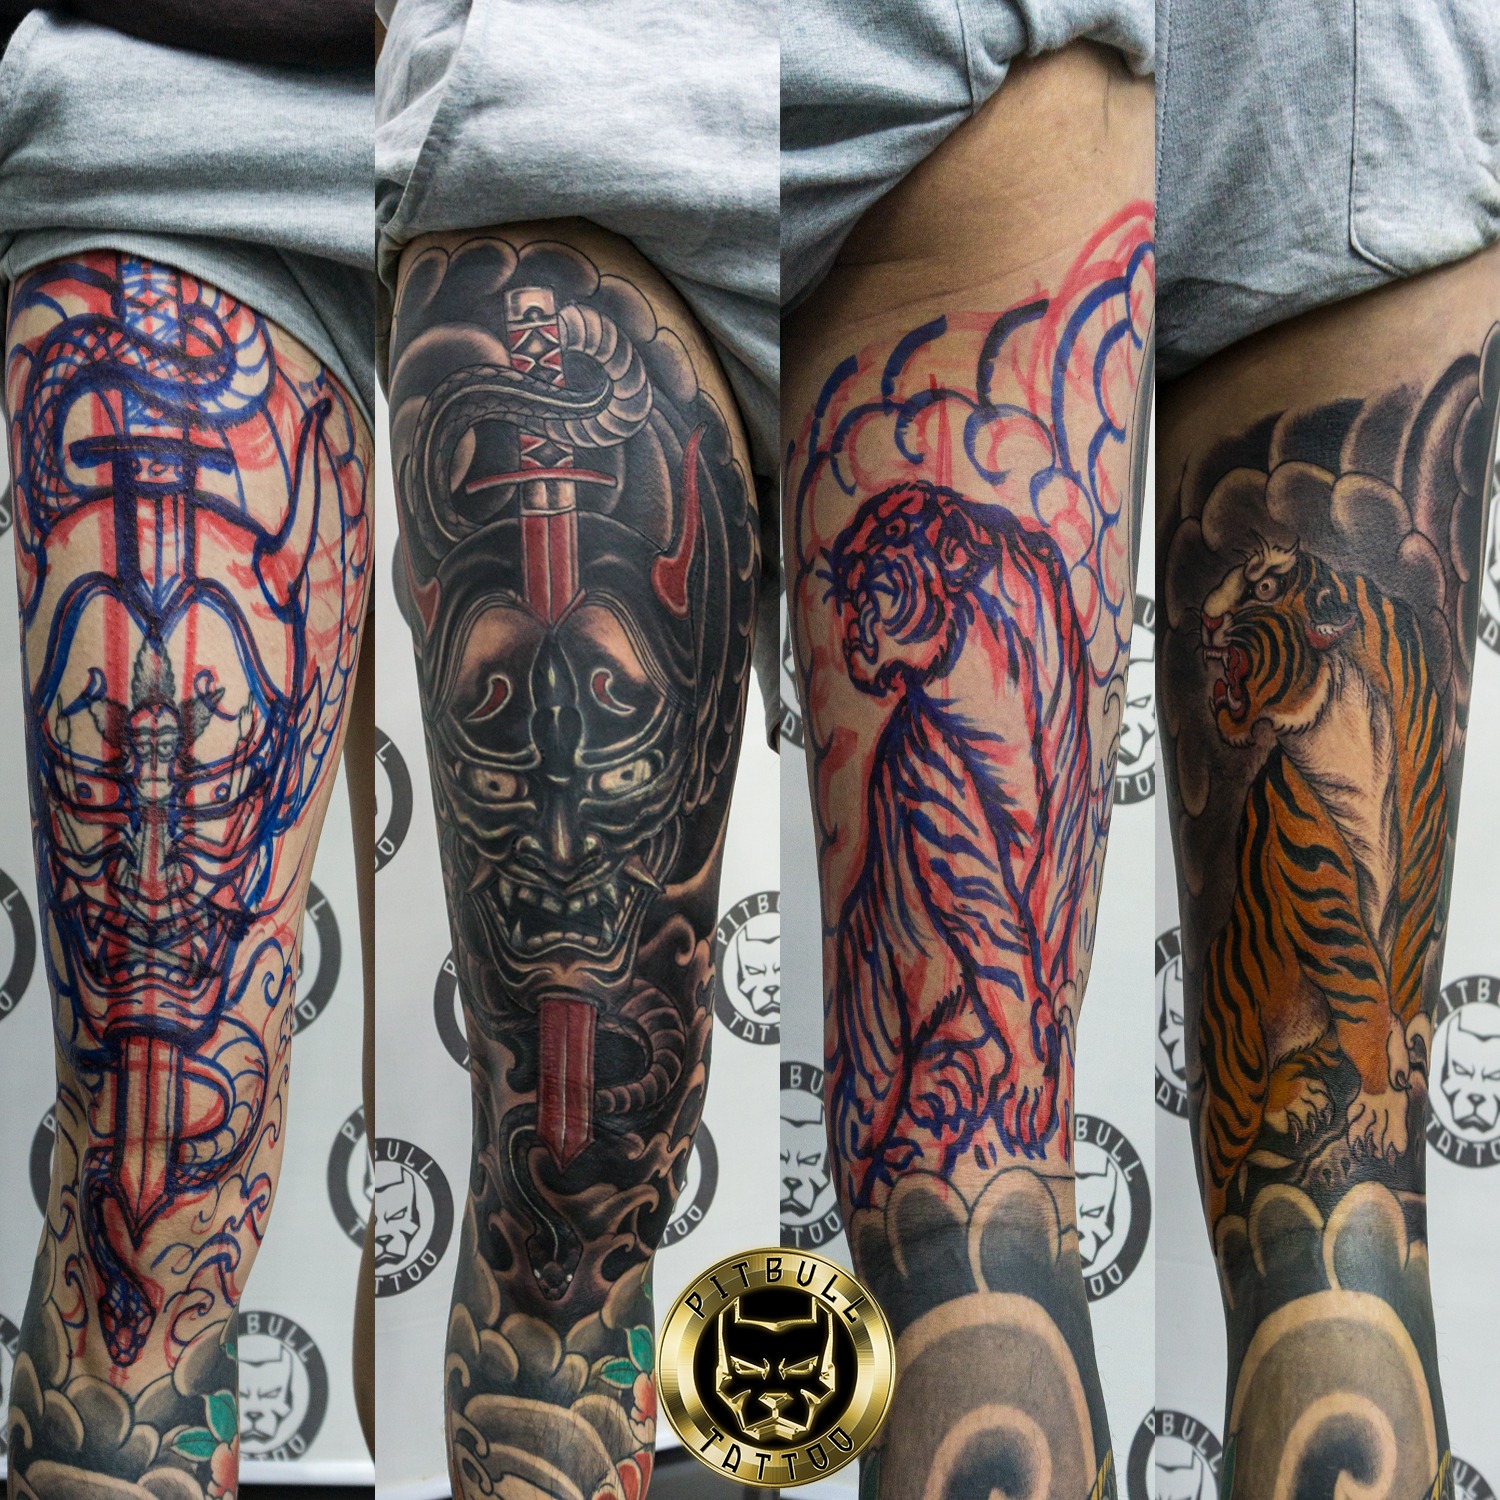 Freehand tattoo specialization Full arm sleeve tattoo Japanese tiger and demon